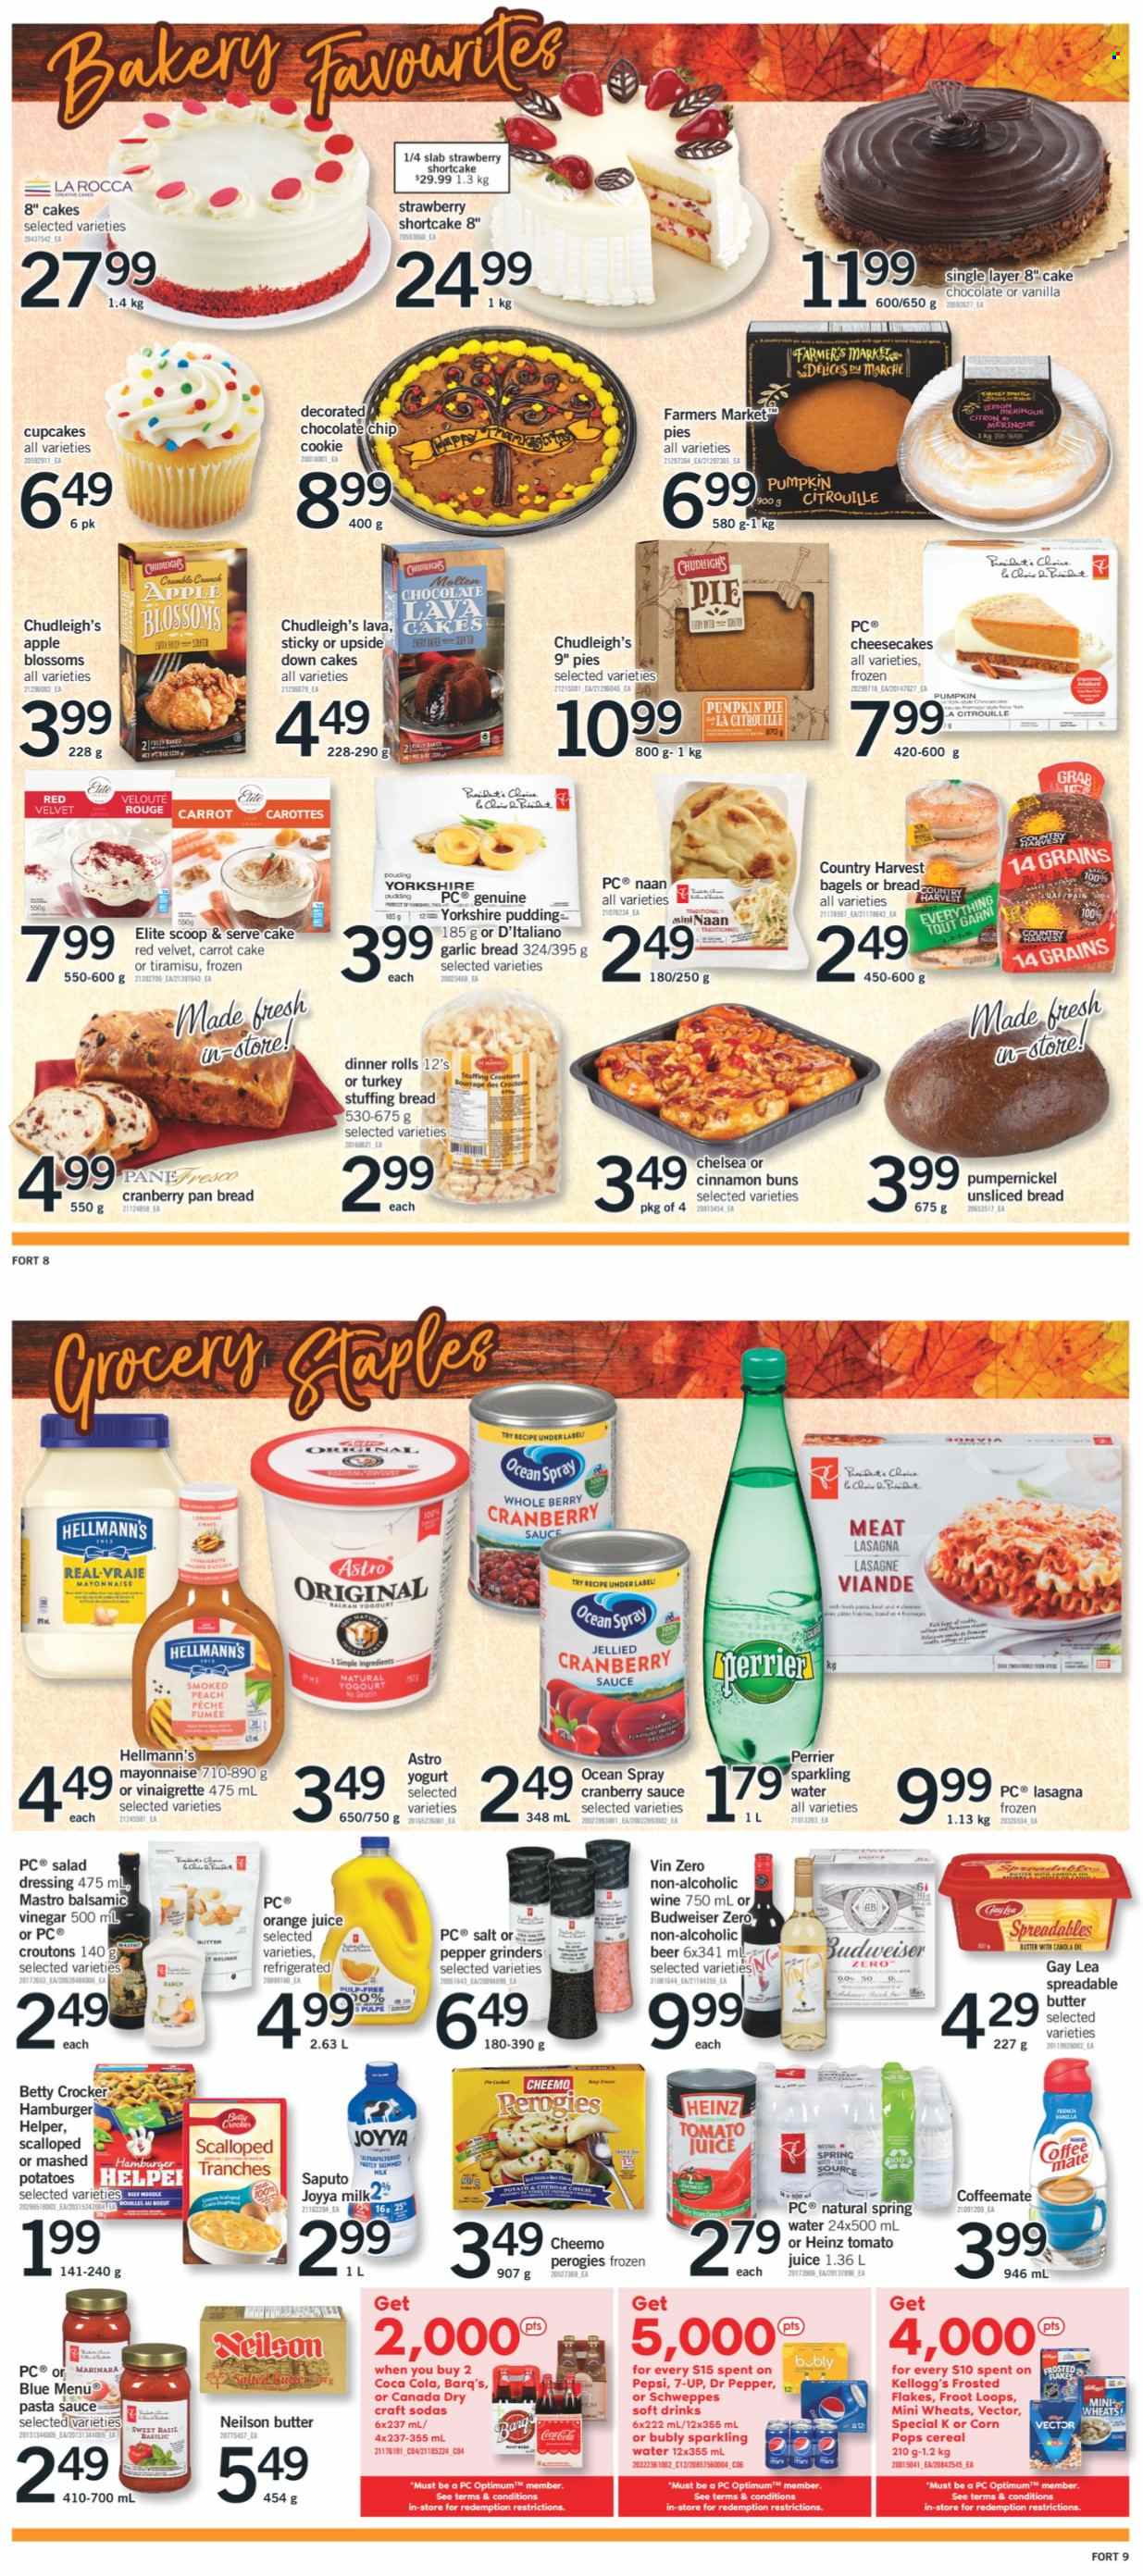 thumbnail - Fortinos Flyer - October 07, 2021 - October 10, 2021 - Sales products - bagels, cake, dinner rolls, buns, apple pie, cupcake, tiramisu, mashed potatoes, pasta sauce, lasagna meal, pudding, yoghurt, butter, spreadable butter, mayonnaise, Hellmann’s, Country Harvest, Kellogg's, croutons, Heinz, cereals, Frosted Flakes, Corn Pops, esponja, cinnamon, salad dressing, vinaigrette dressing, dressing, balsamic vinegar, vinegar, cranberry sauce, Canada Dry, Coca-Cola, Schweppes, tomato juice, Pepsi, orange juice, juice, Dr. Pepper, soft drink, 7UP, Perrier, spring water, sparkling water, gin, beer, pan, Optimum, Budweiser. Page 6.